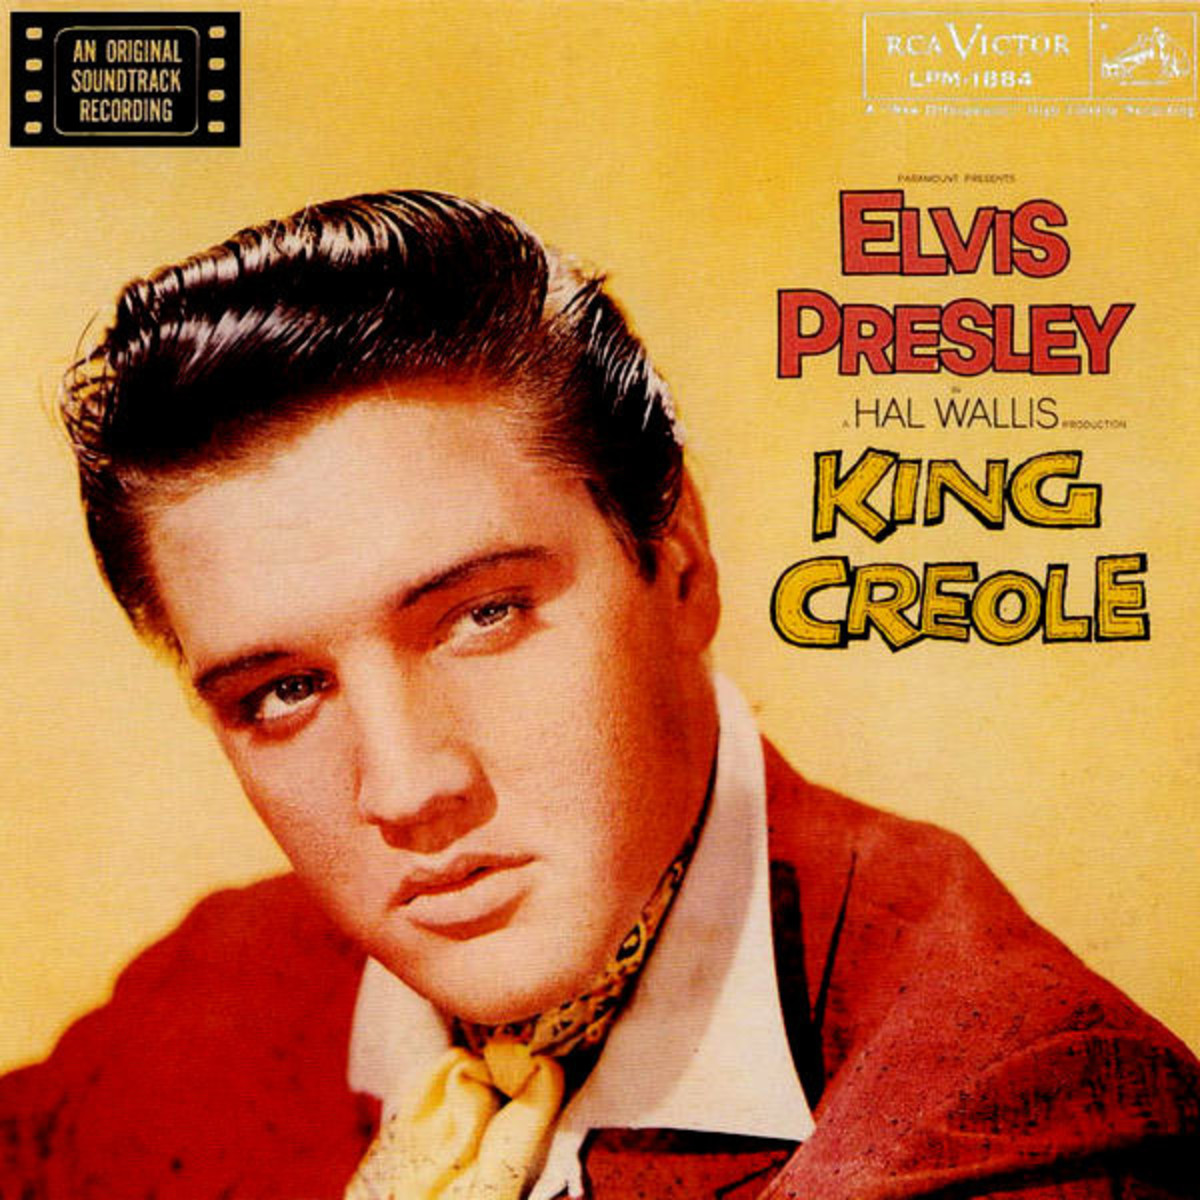 King Creole 1958 soundtrack on RCA Victor